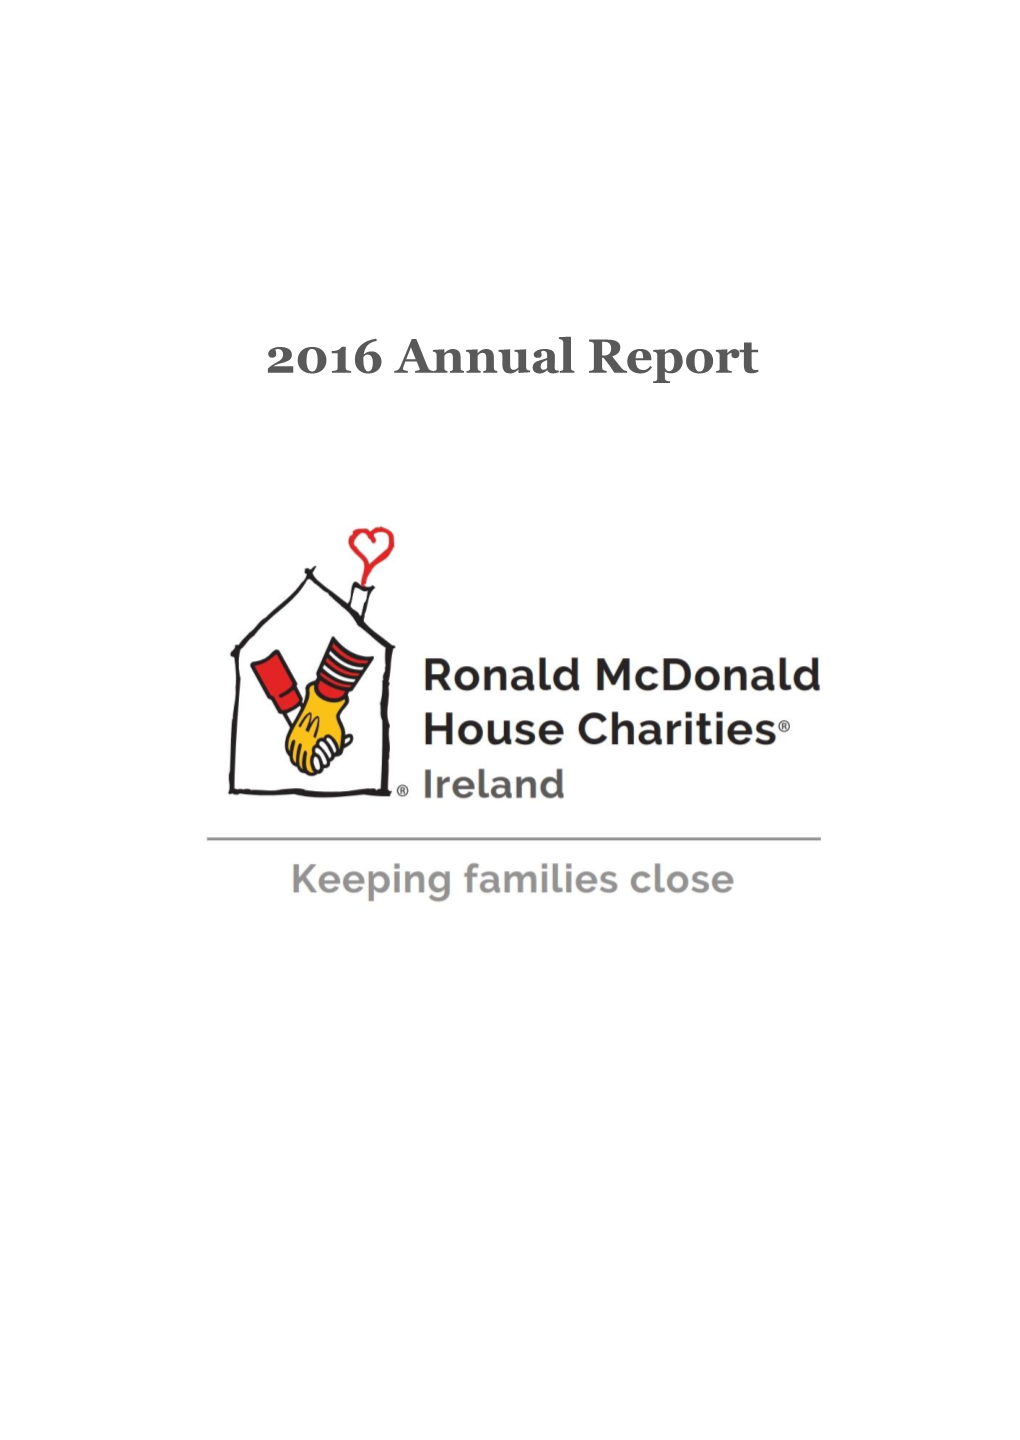 RMHC Ireland Annual Report 2016 Final